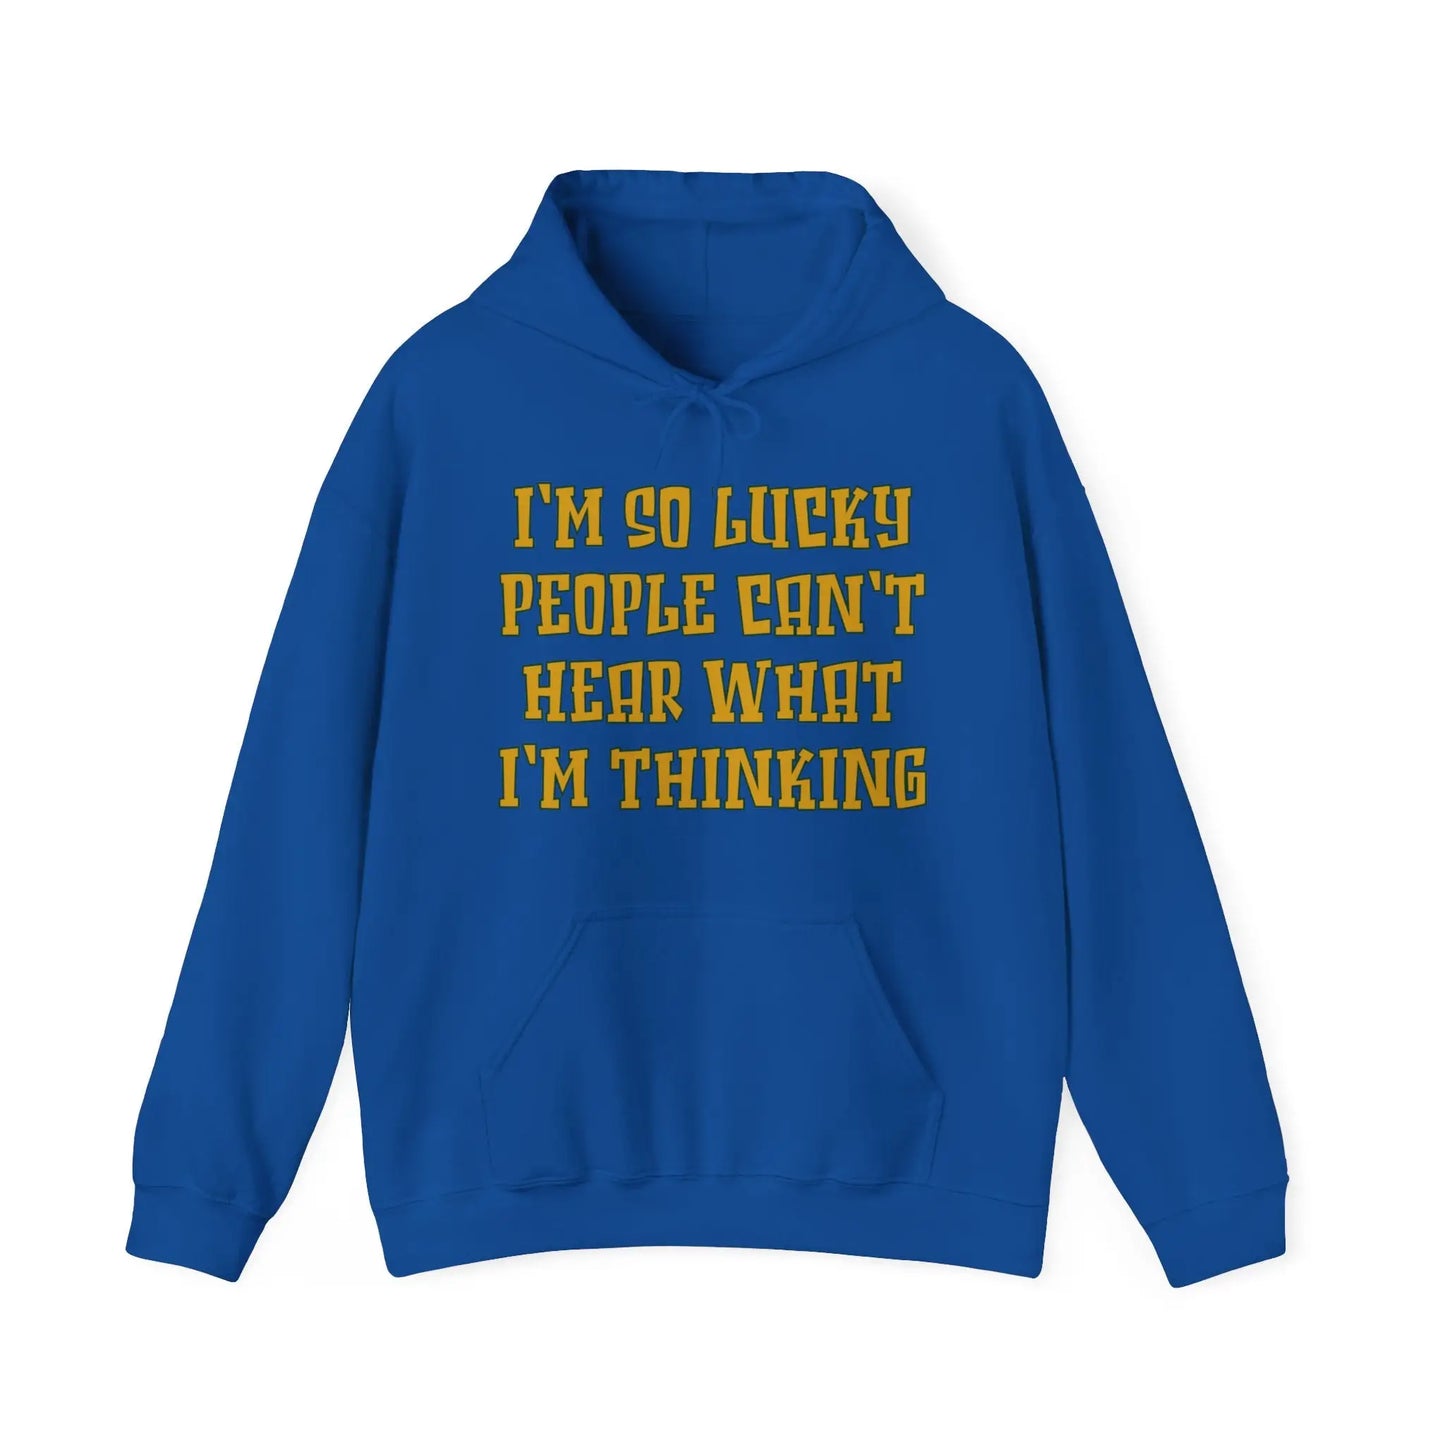 Can't Hear What I'm Thinking Men's Hoodie - Wicked Tees